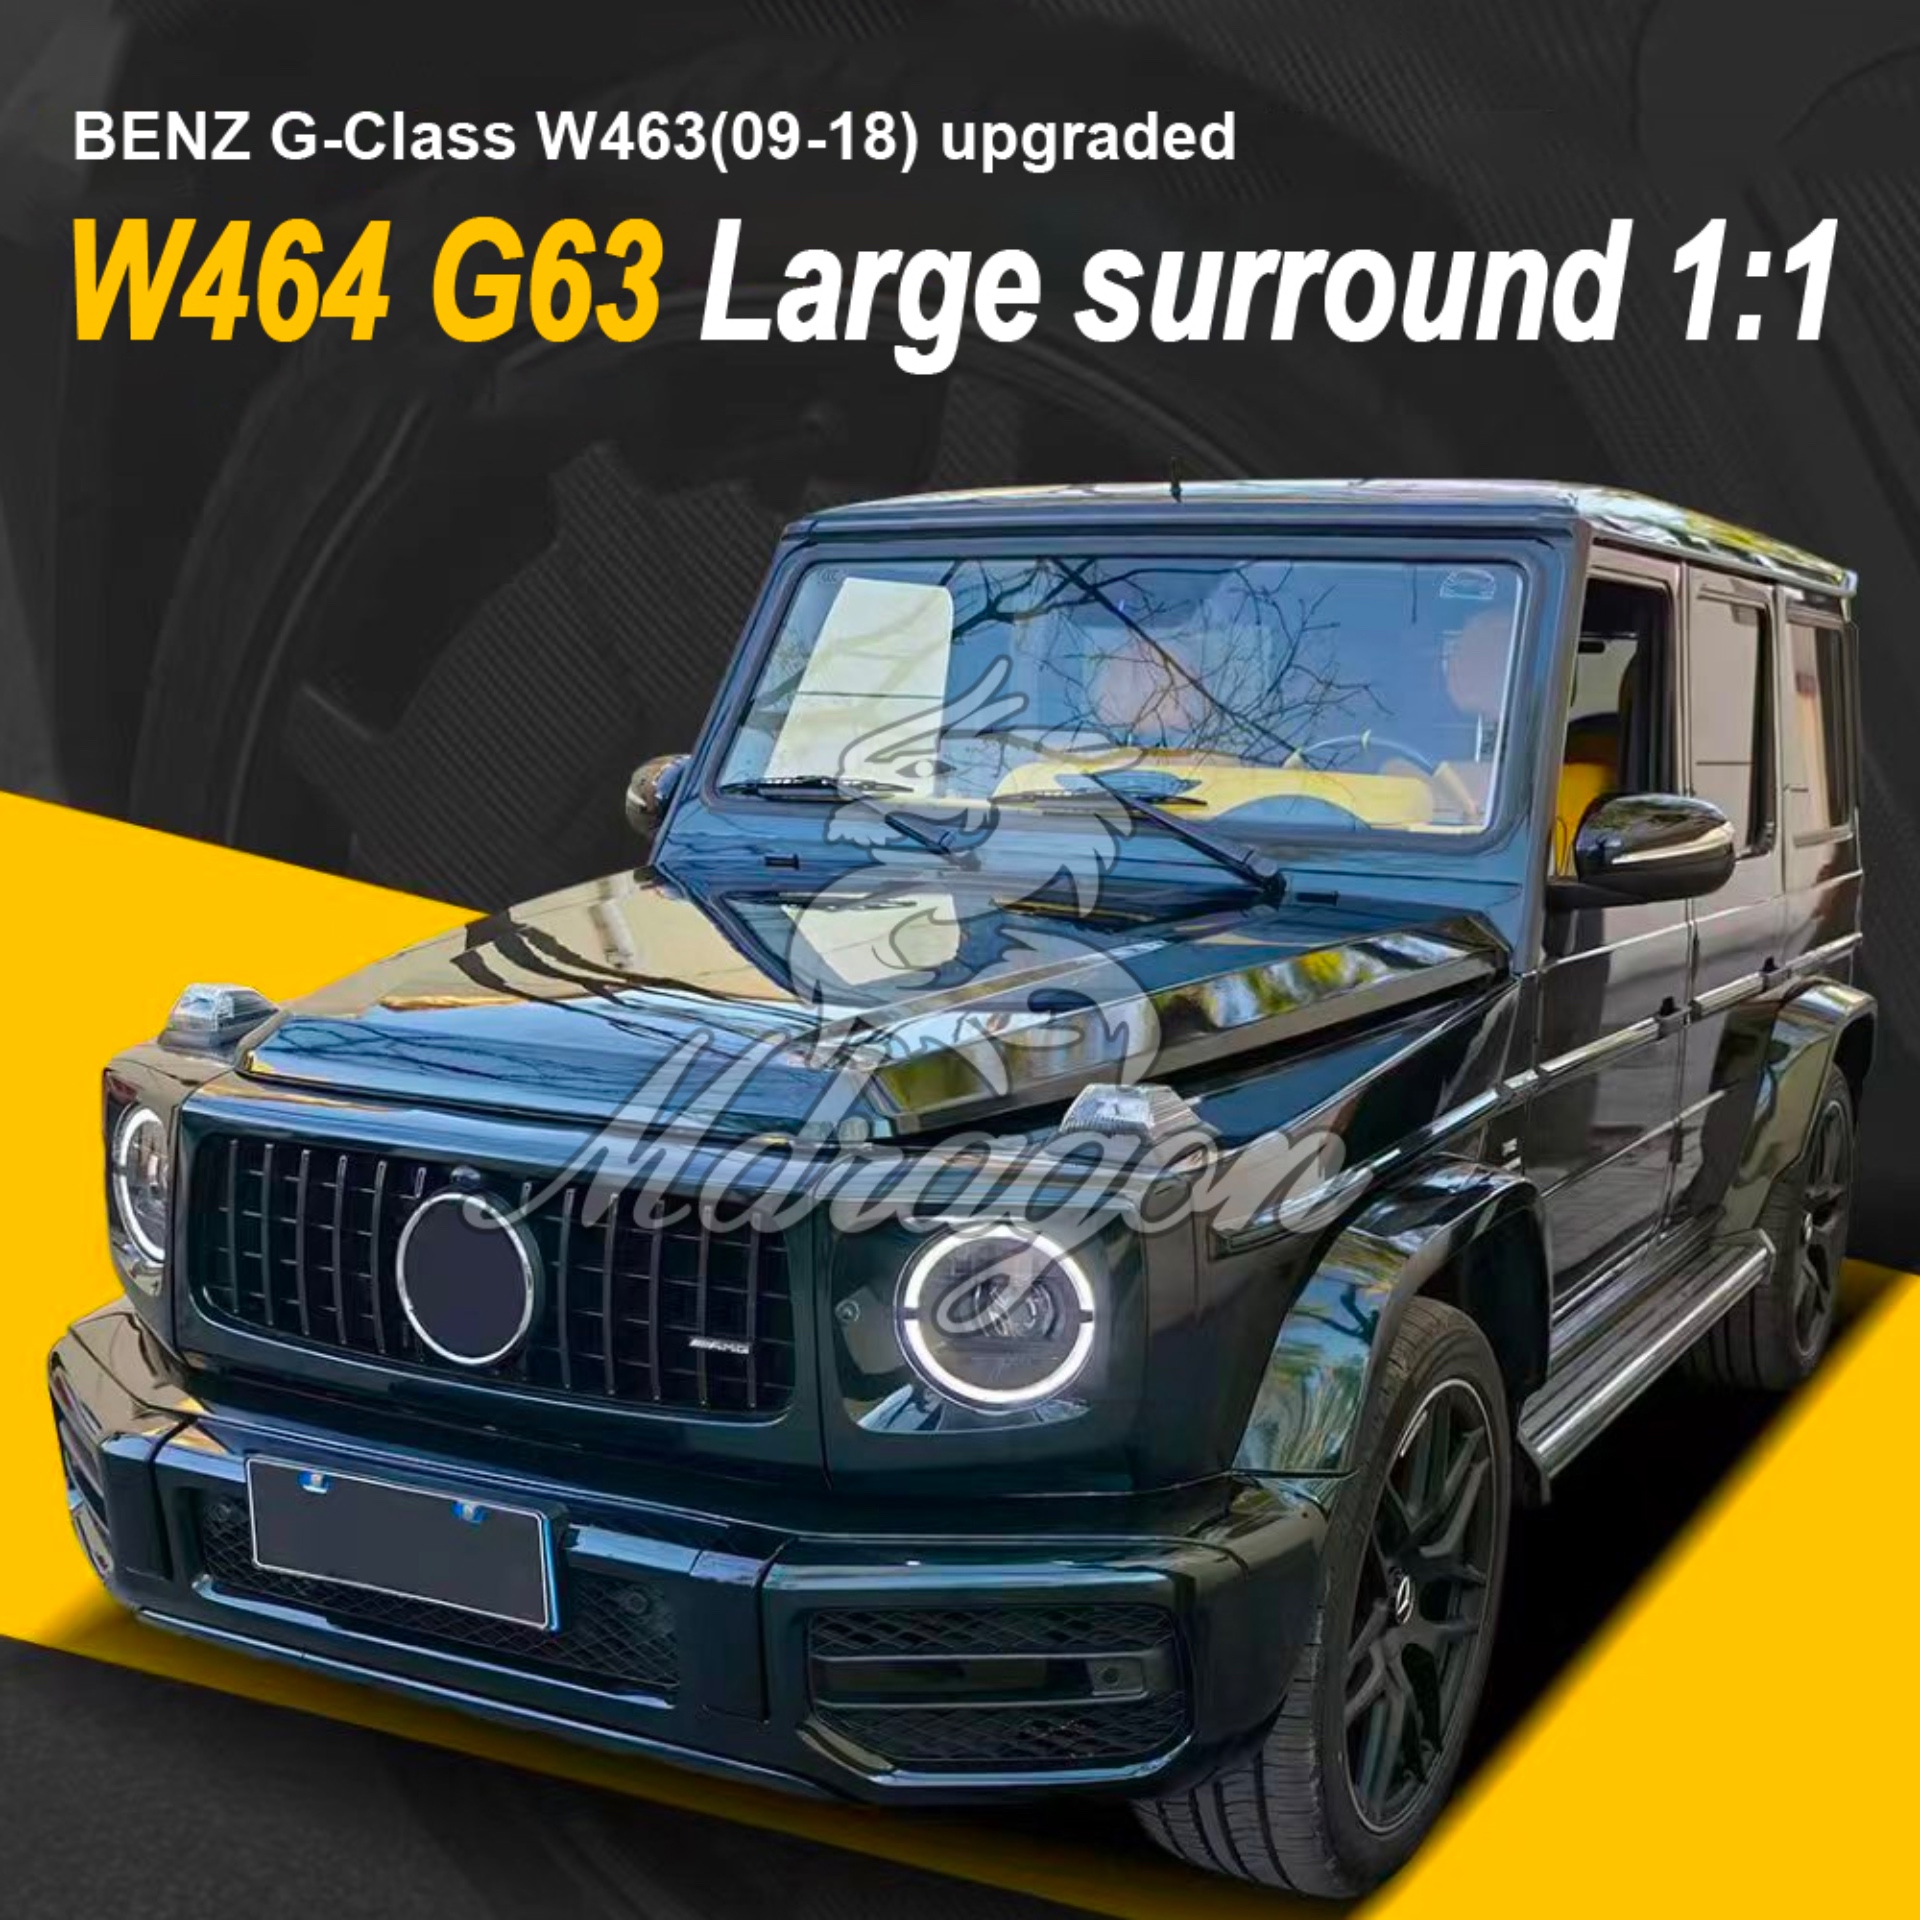 09-18  Benz G Class Modified 1:1 G63 large surround